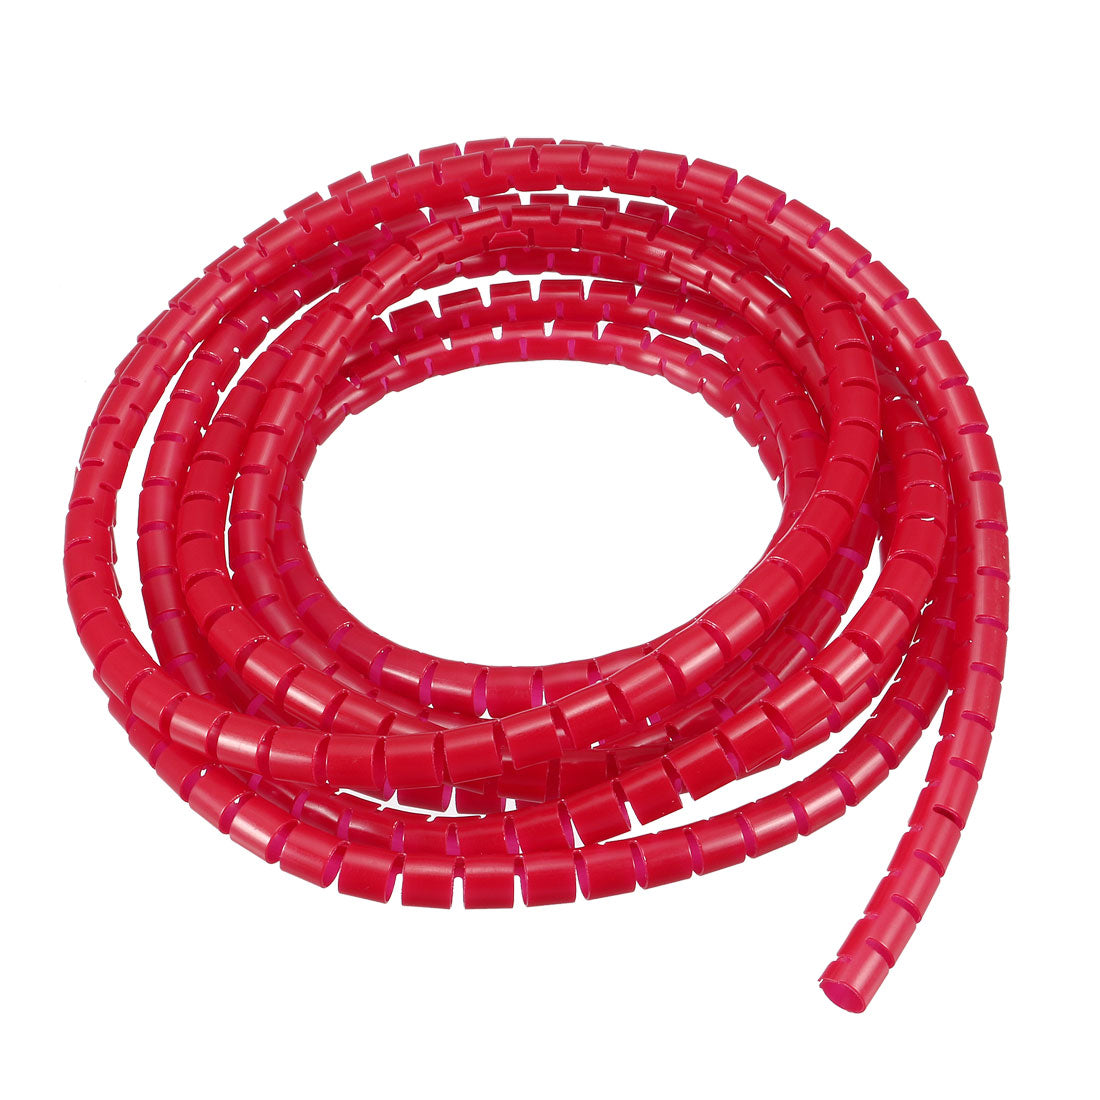 uxcell Uxcell Cable Management Sleeve Wire Wrap Cord Organizer 7mm x 8mm 3 Meters Length Red